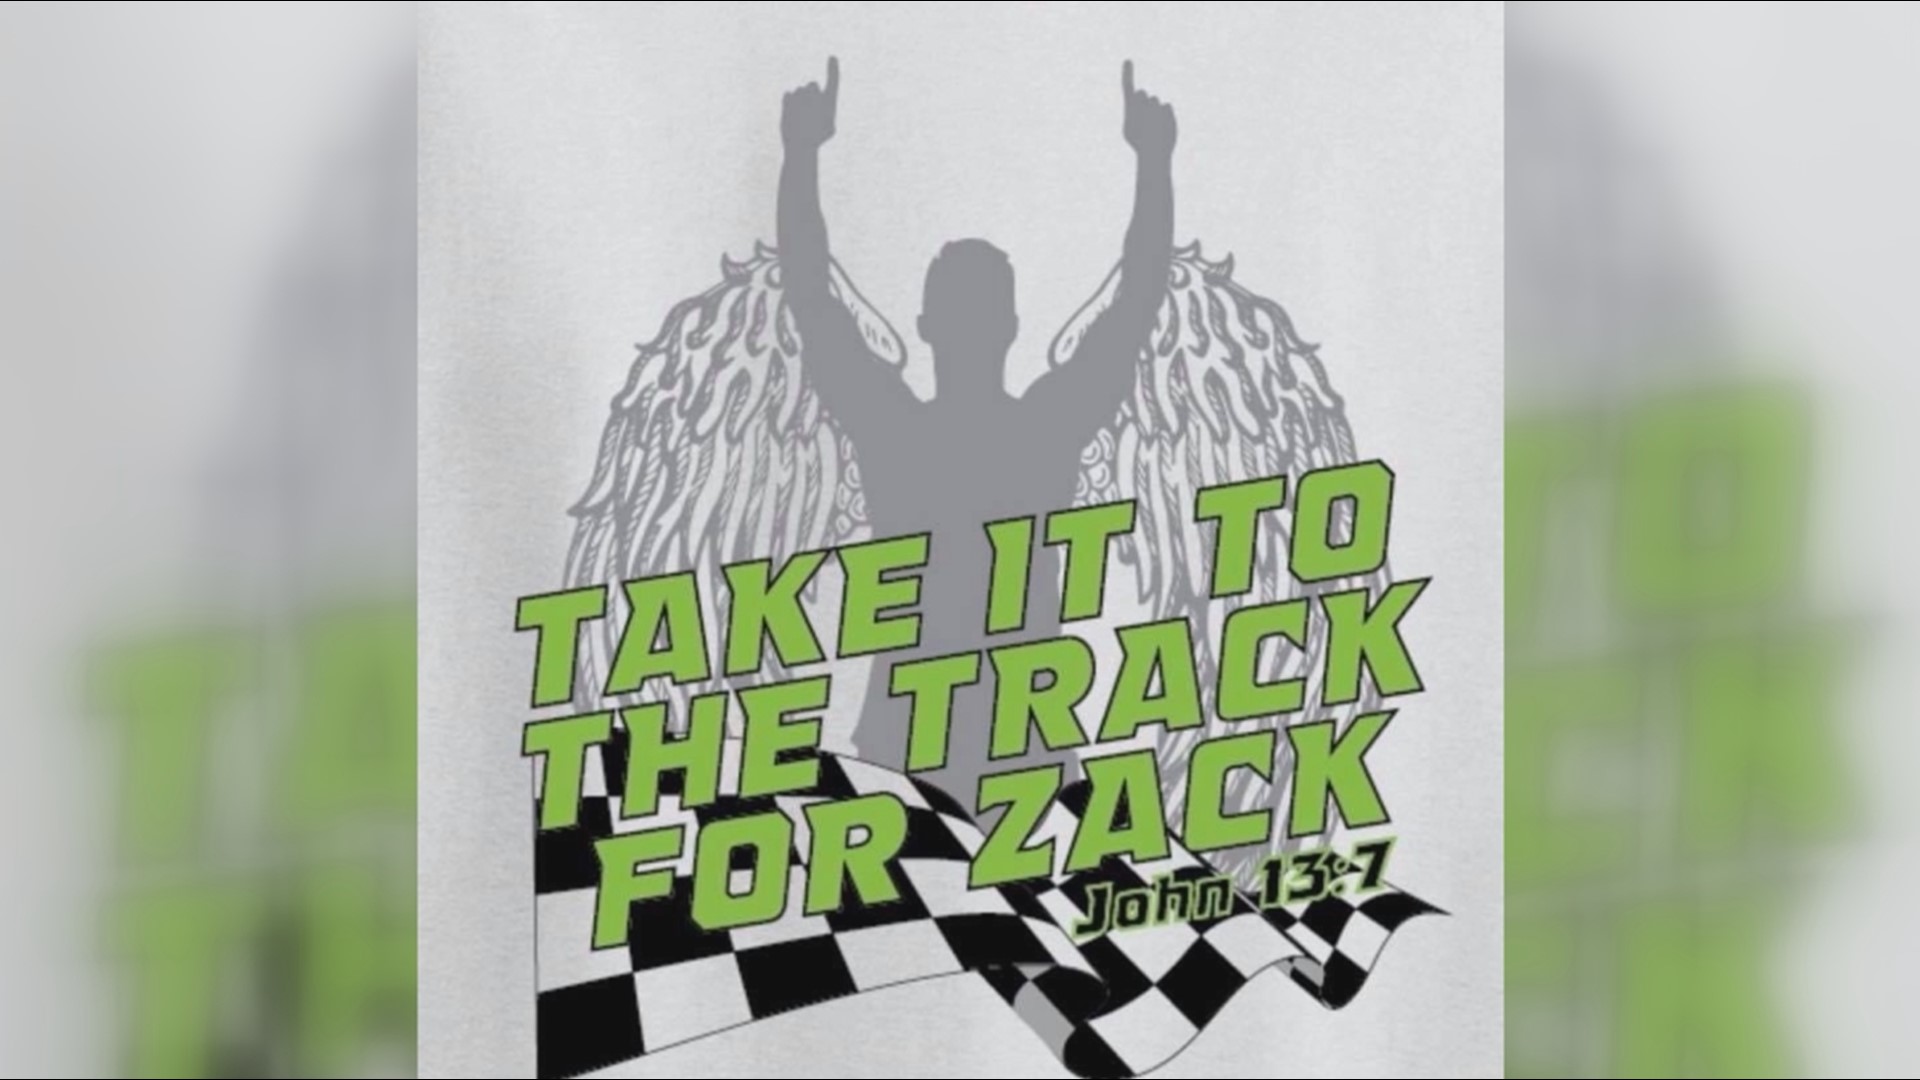 Zack Landry was killed in a car crash due to street racing in Odessa. That is why his family organized an annual event called "Take it to the track for Zack."